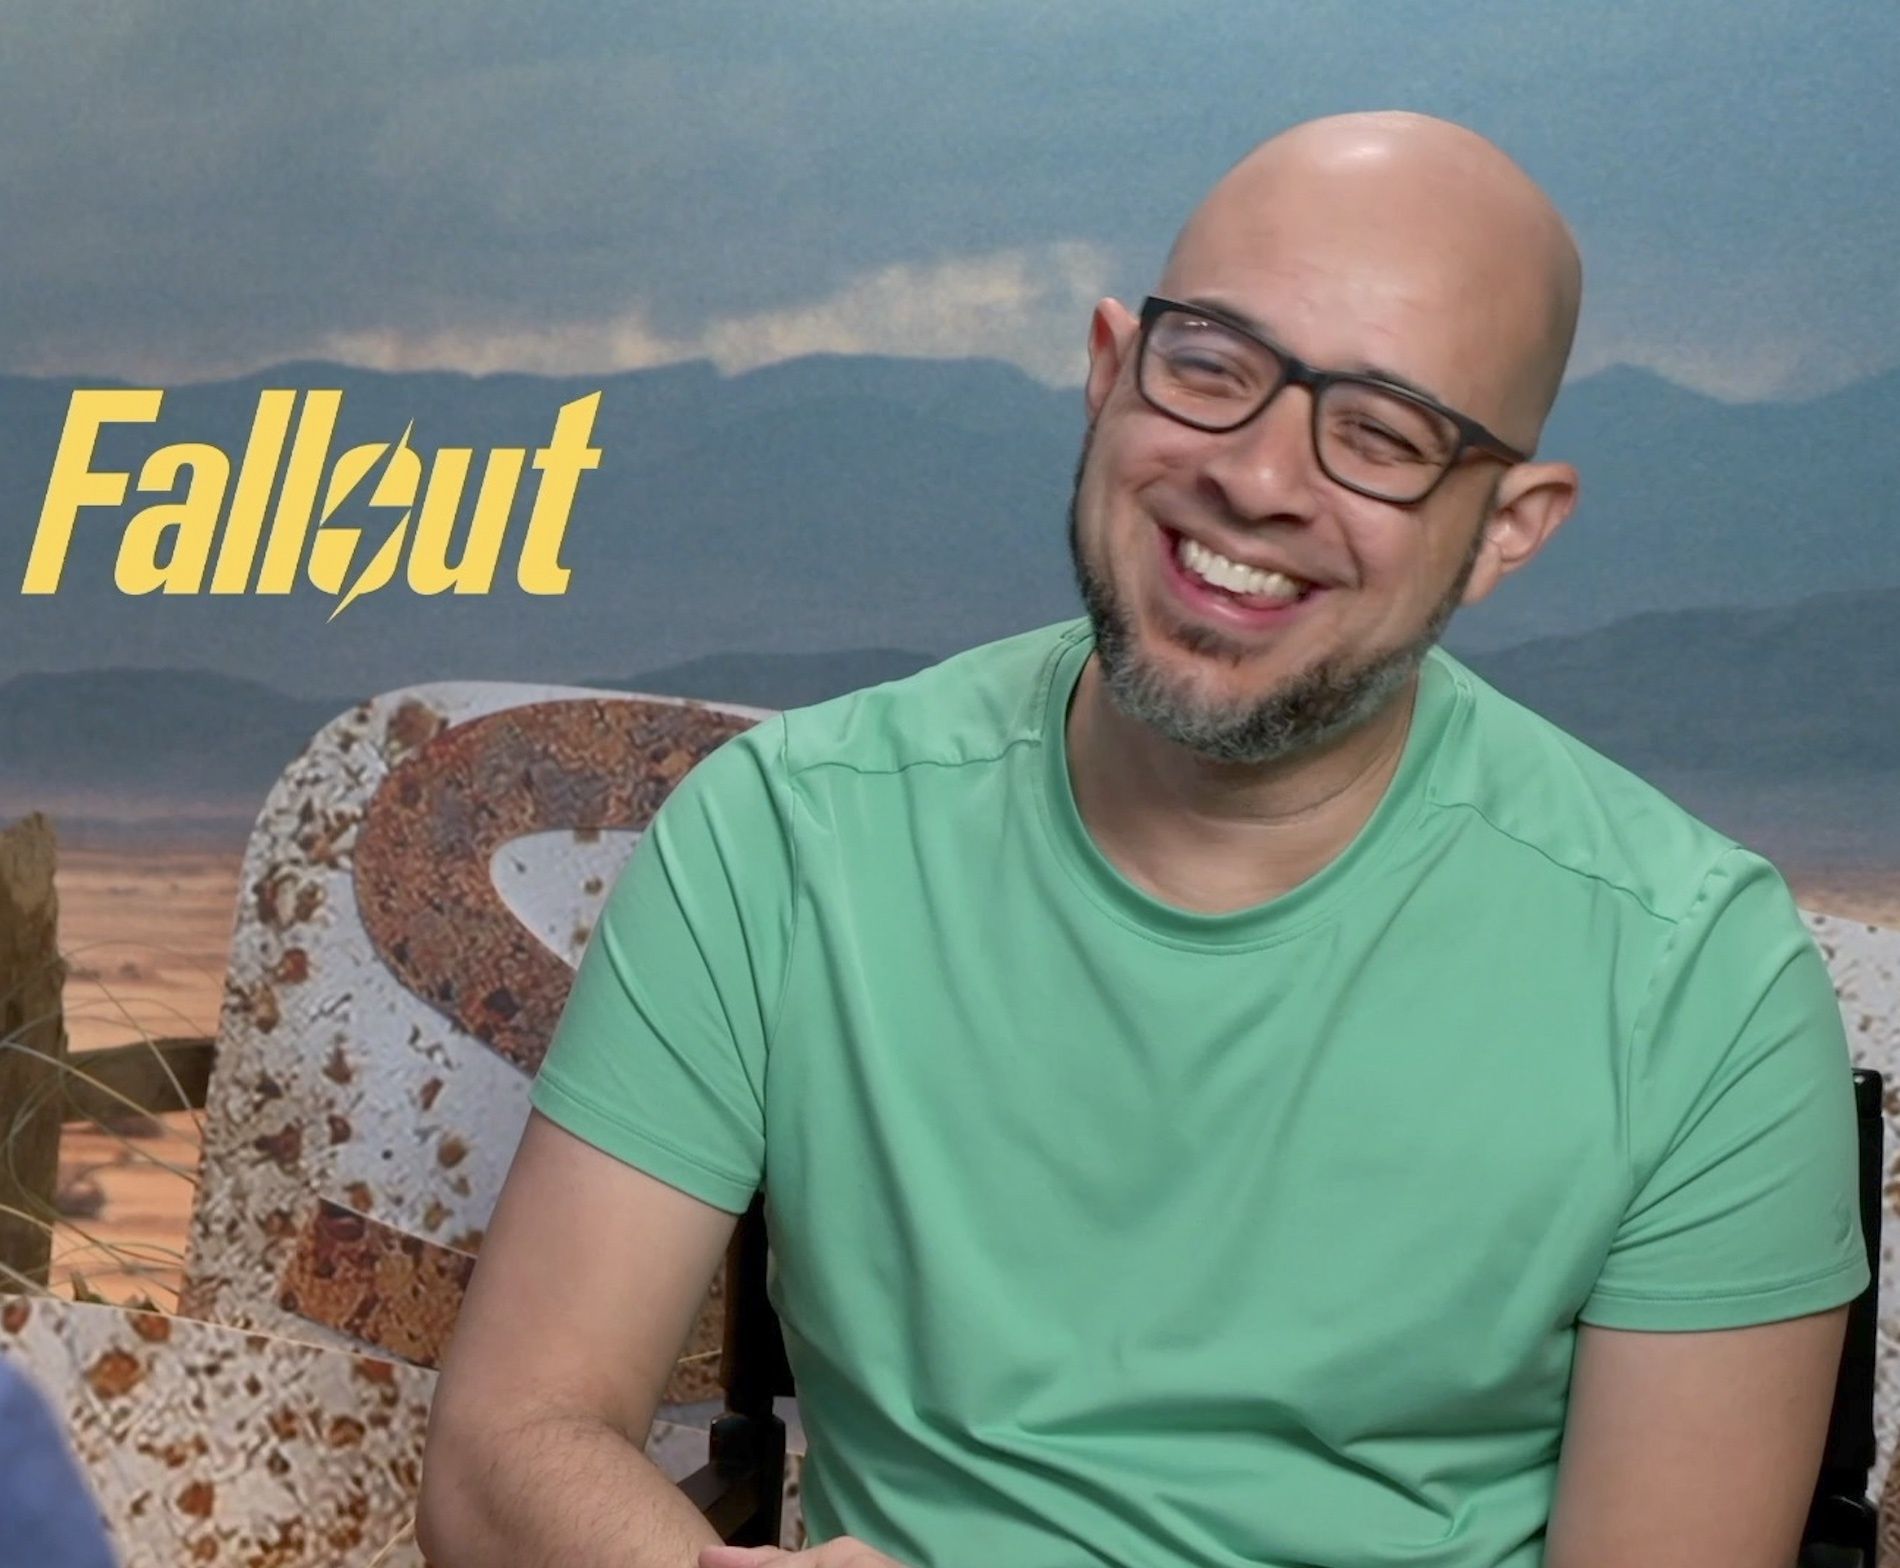 S19 Ep1336: Fallout TV Series – Interviews with Cast and Crew